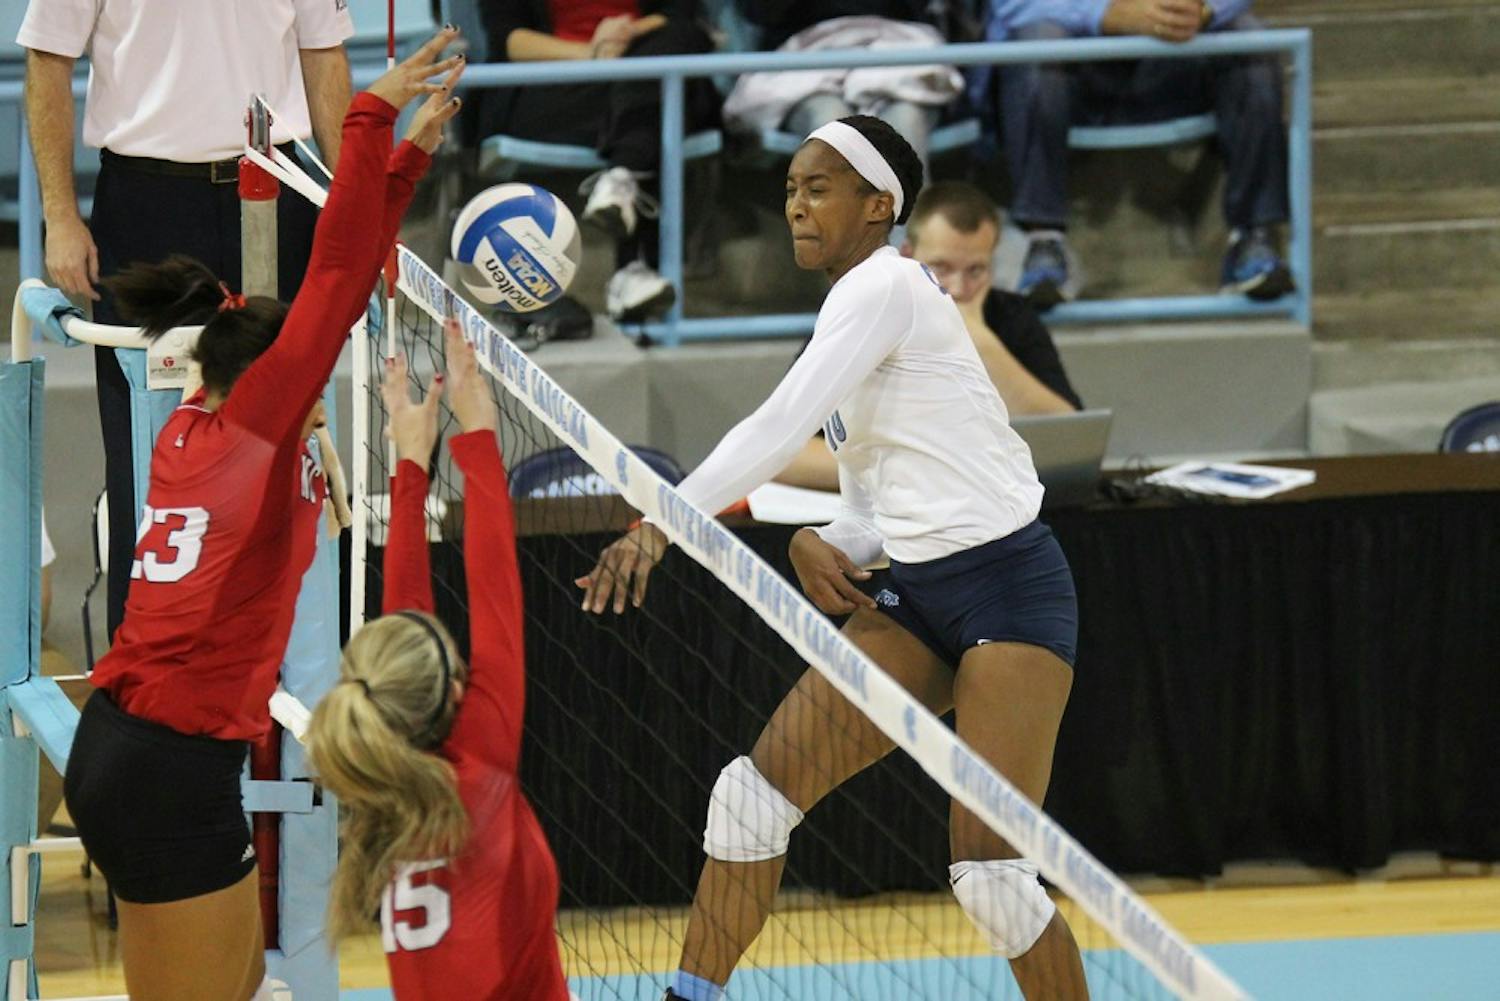 Senior opposite hitter Chaniel Nelson spikes the ball over NC State players and helped contribute to the Heels' .351 team hitting percentage.